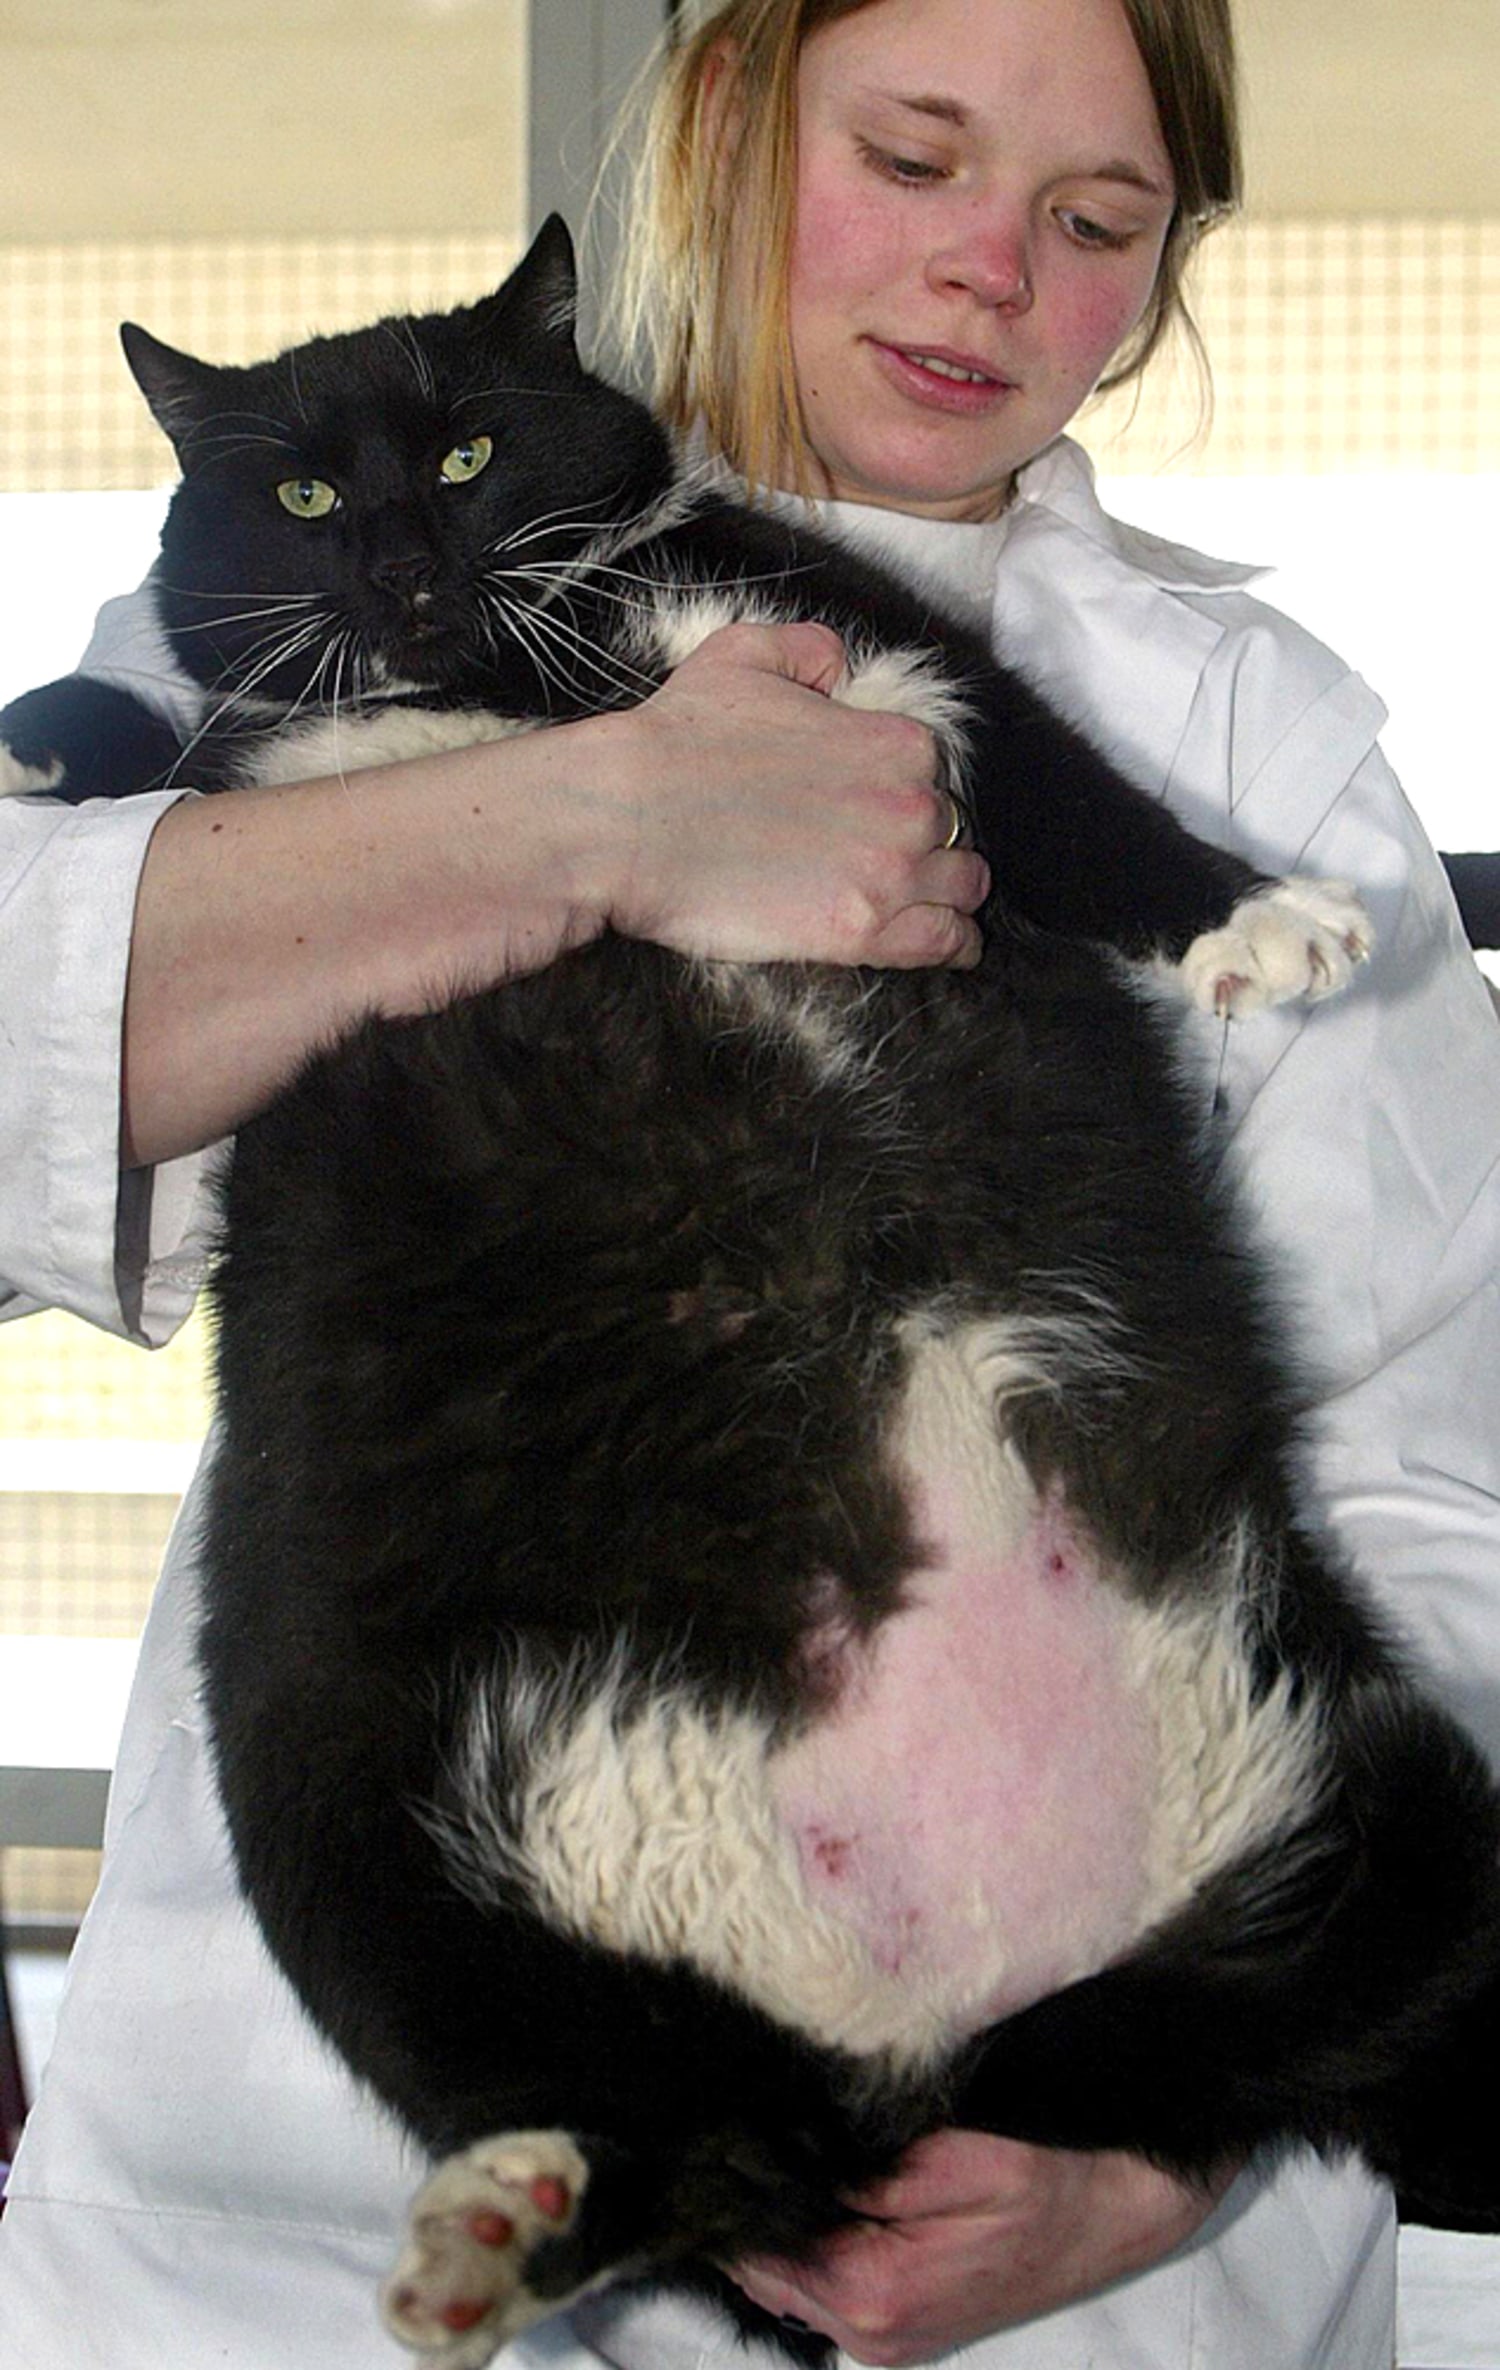 Fat white and black cat